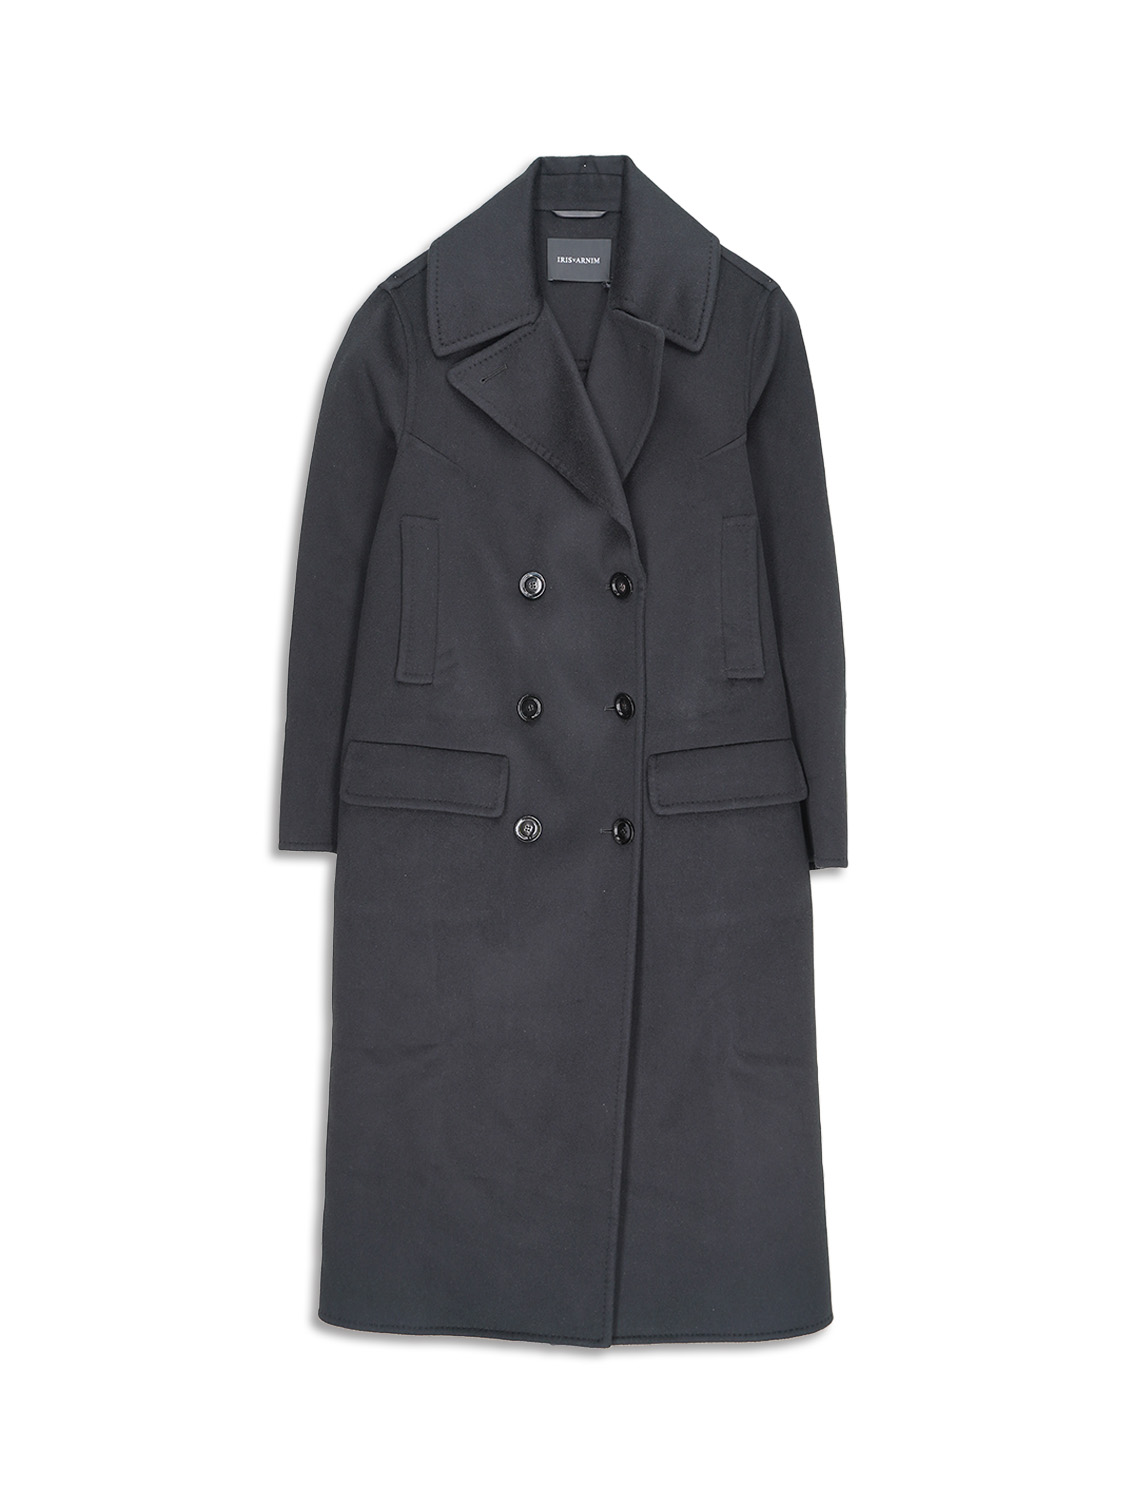 Granada - Classic coat with double-breasted button placket